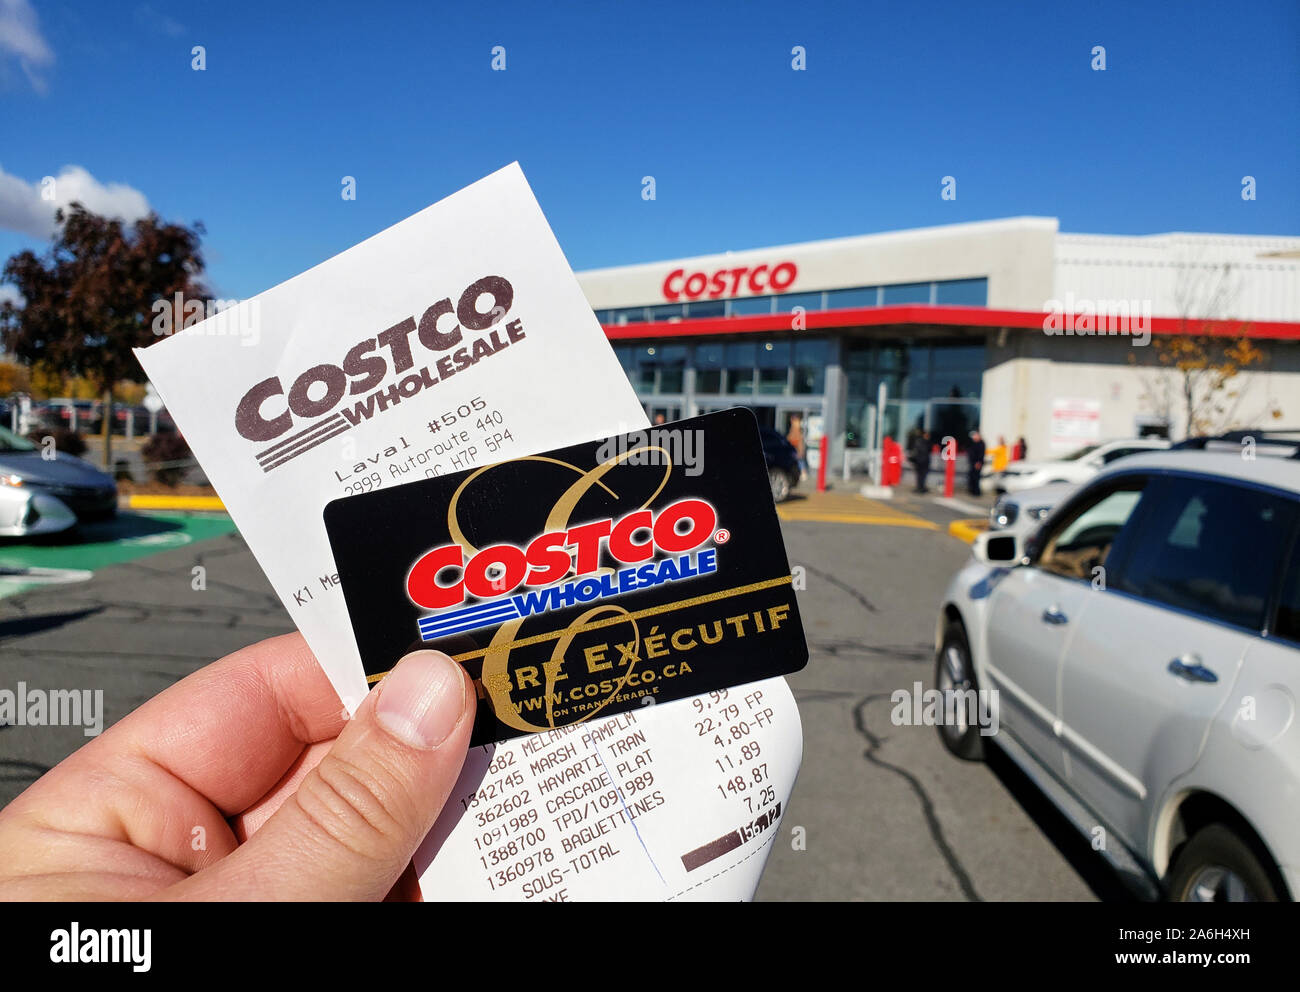 Montreal, Canada - October 26, 2019: A hand holding a receipt and Costco Membership card in Costco warehouse. Costco is an American corporation which Stock Photo